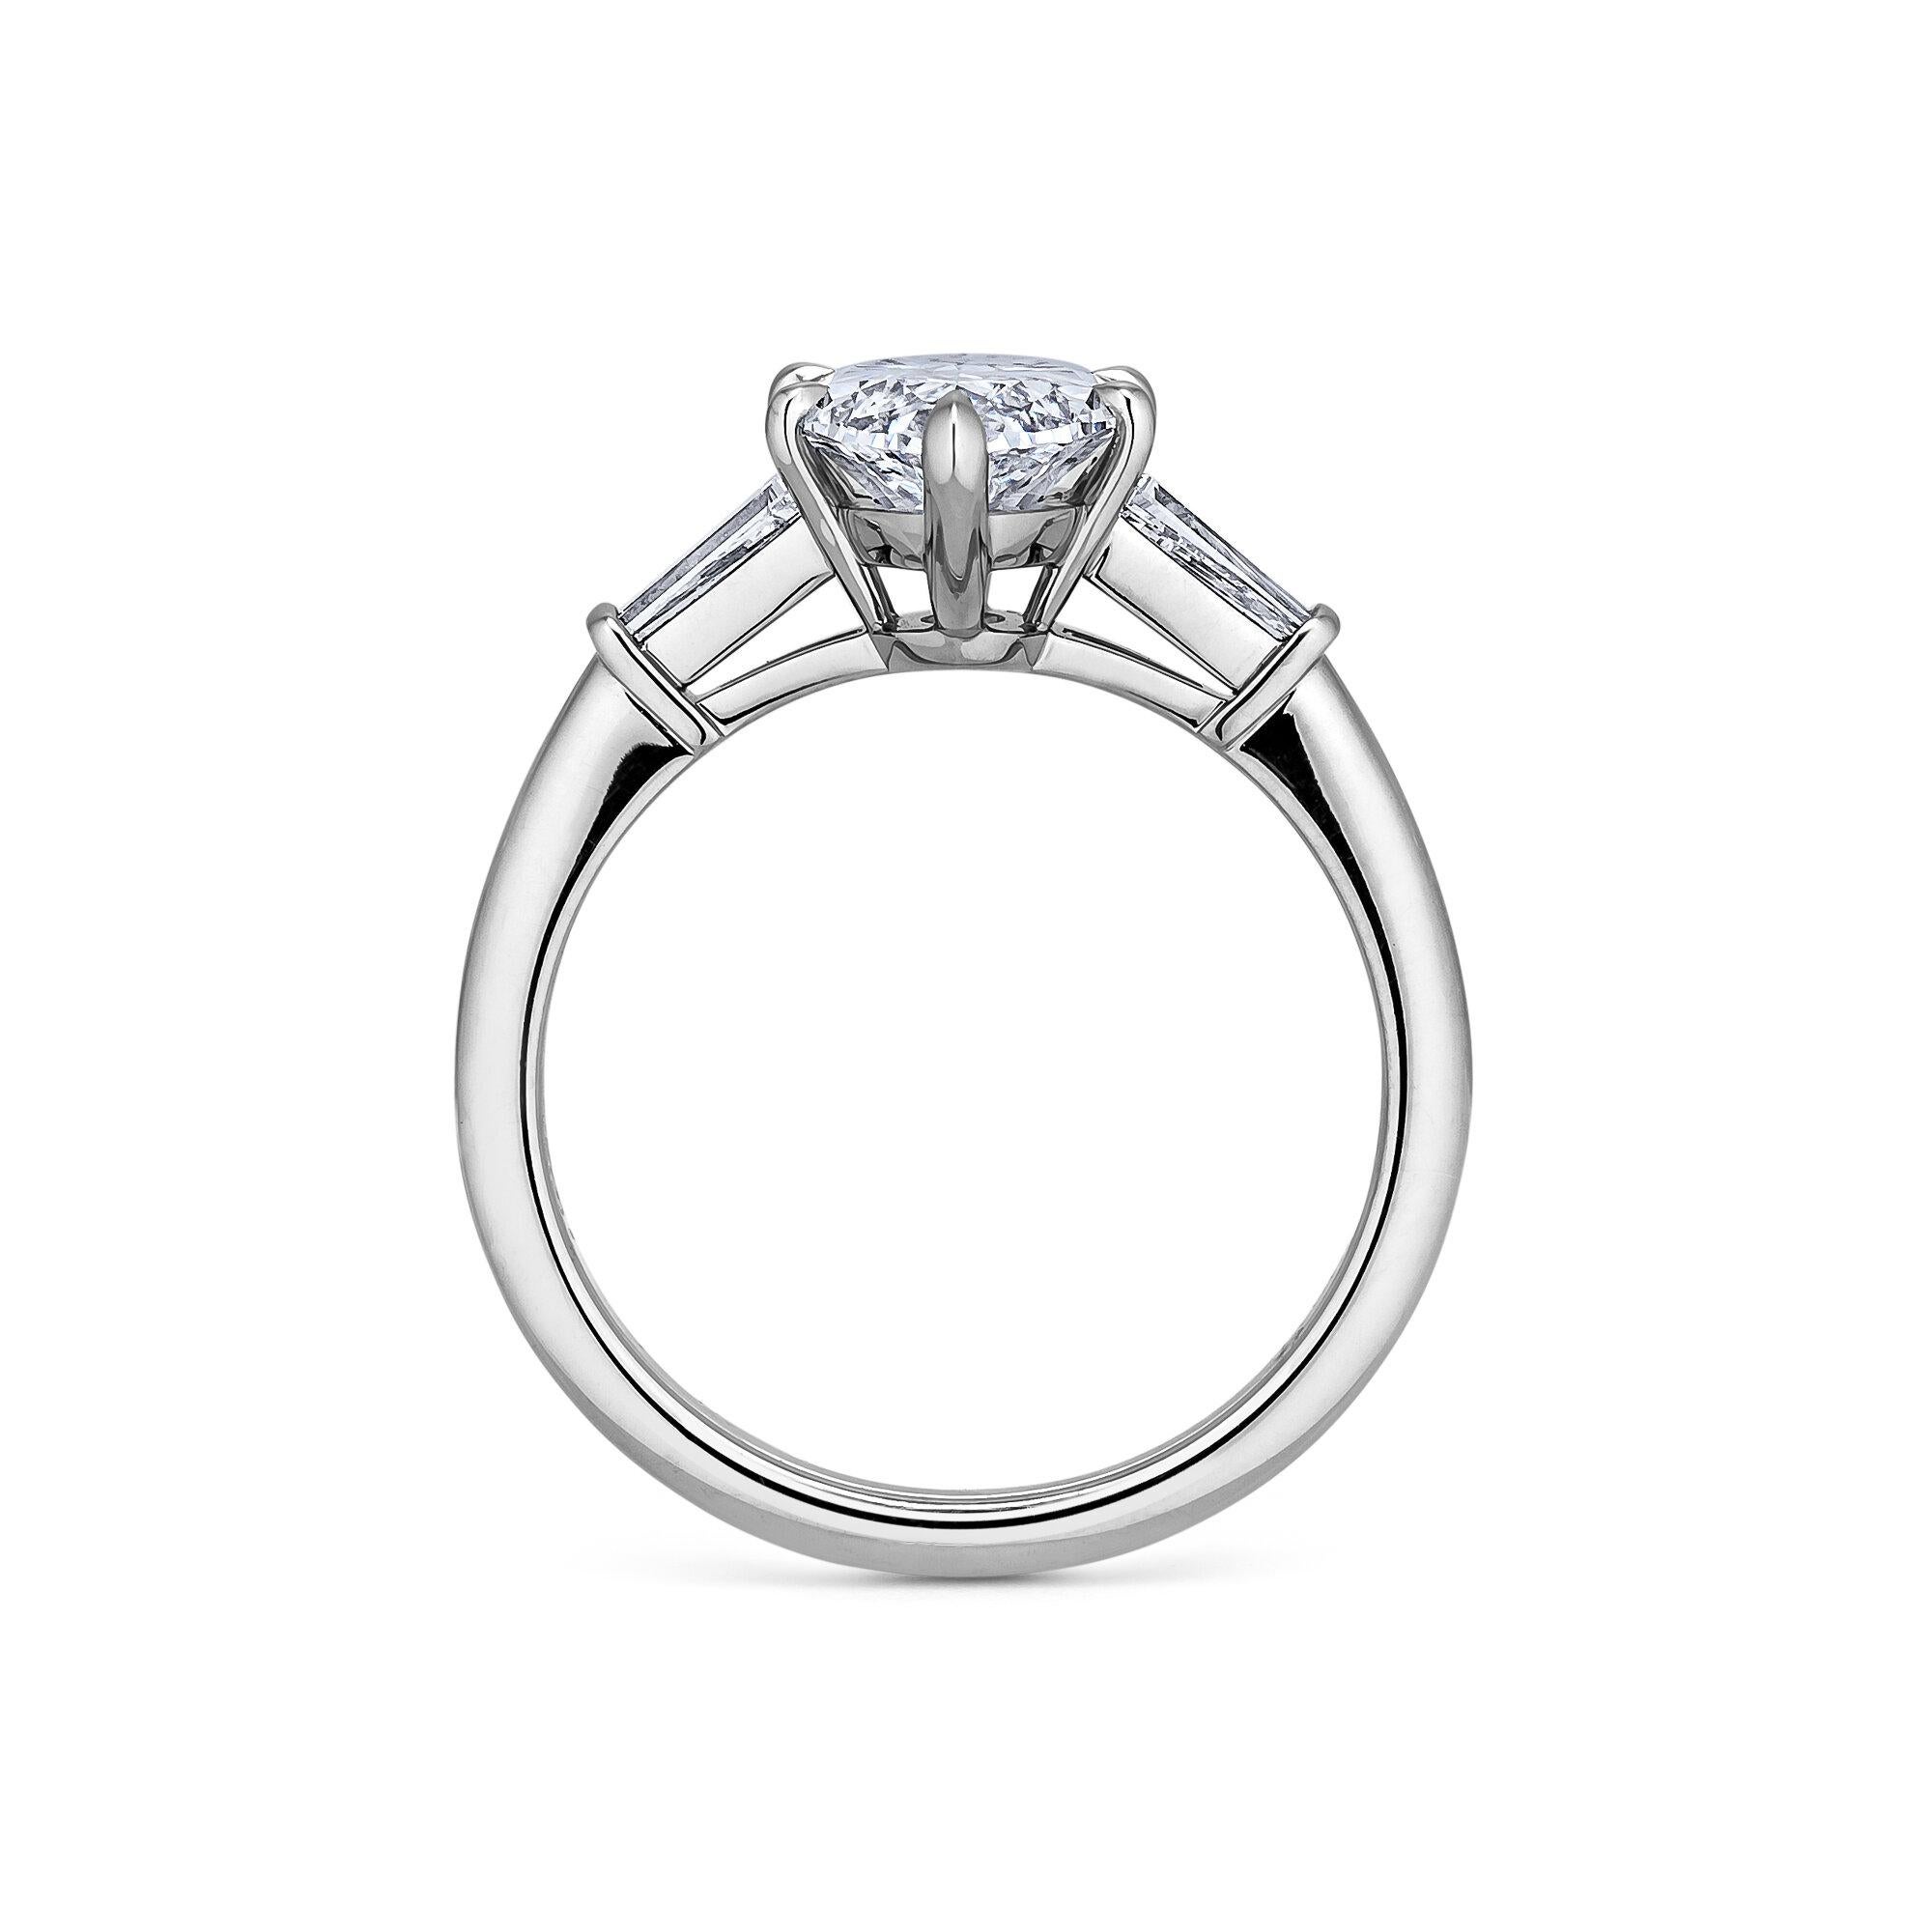 This sizzling 2.18 marquise brilliant cut diamond engagement ring will always keep your inner fire going.  With an exceptional color, this dazzling marquise center set diamond is perfectly proportioned and a true show stopper.  Center stone GIA